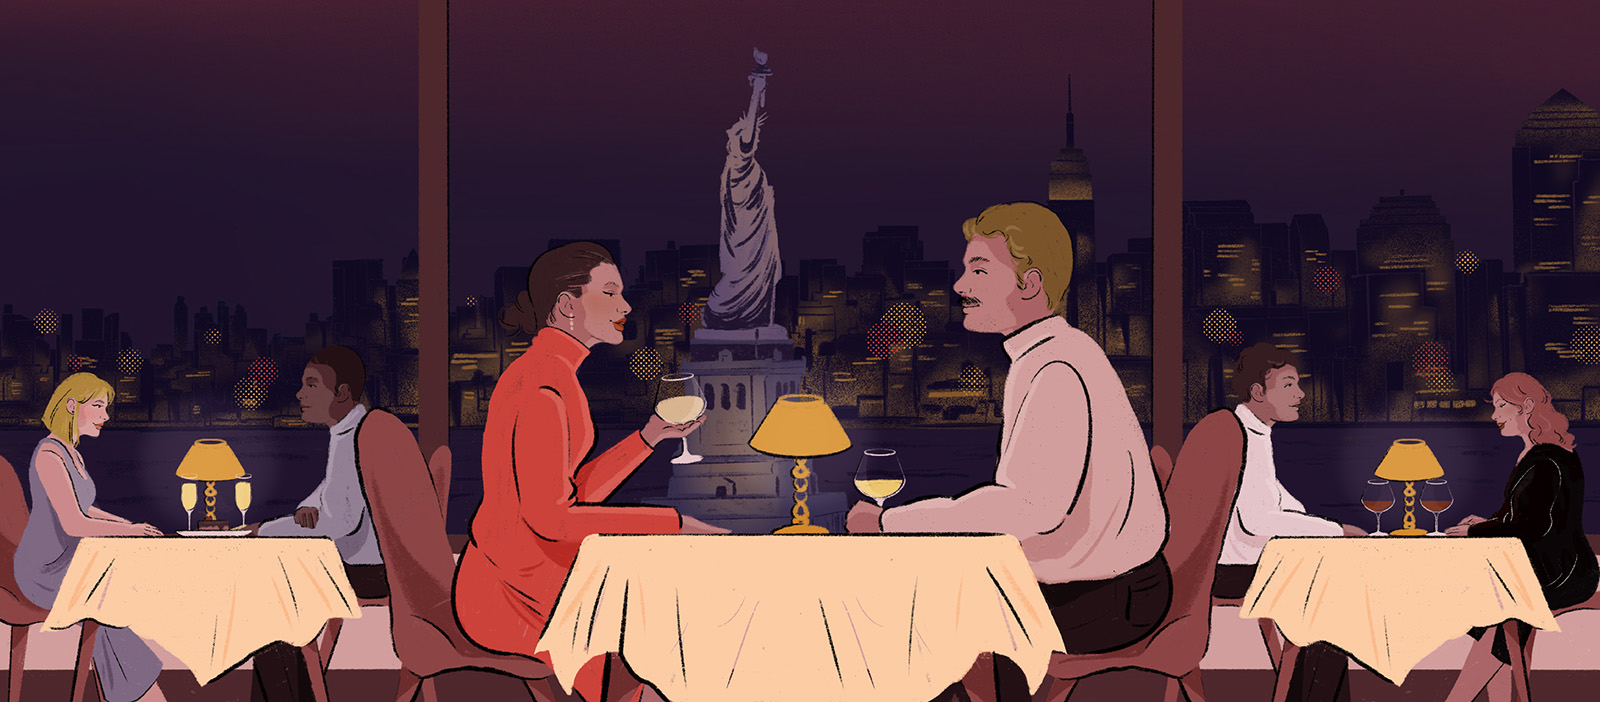 A couple on a date in New York City. Illustration for Hyphen by Heedayah Lockman